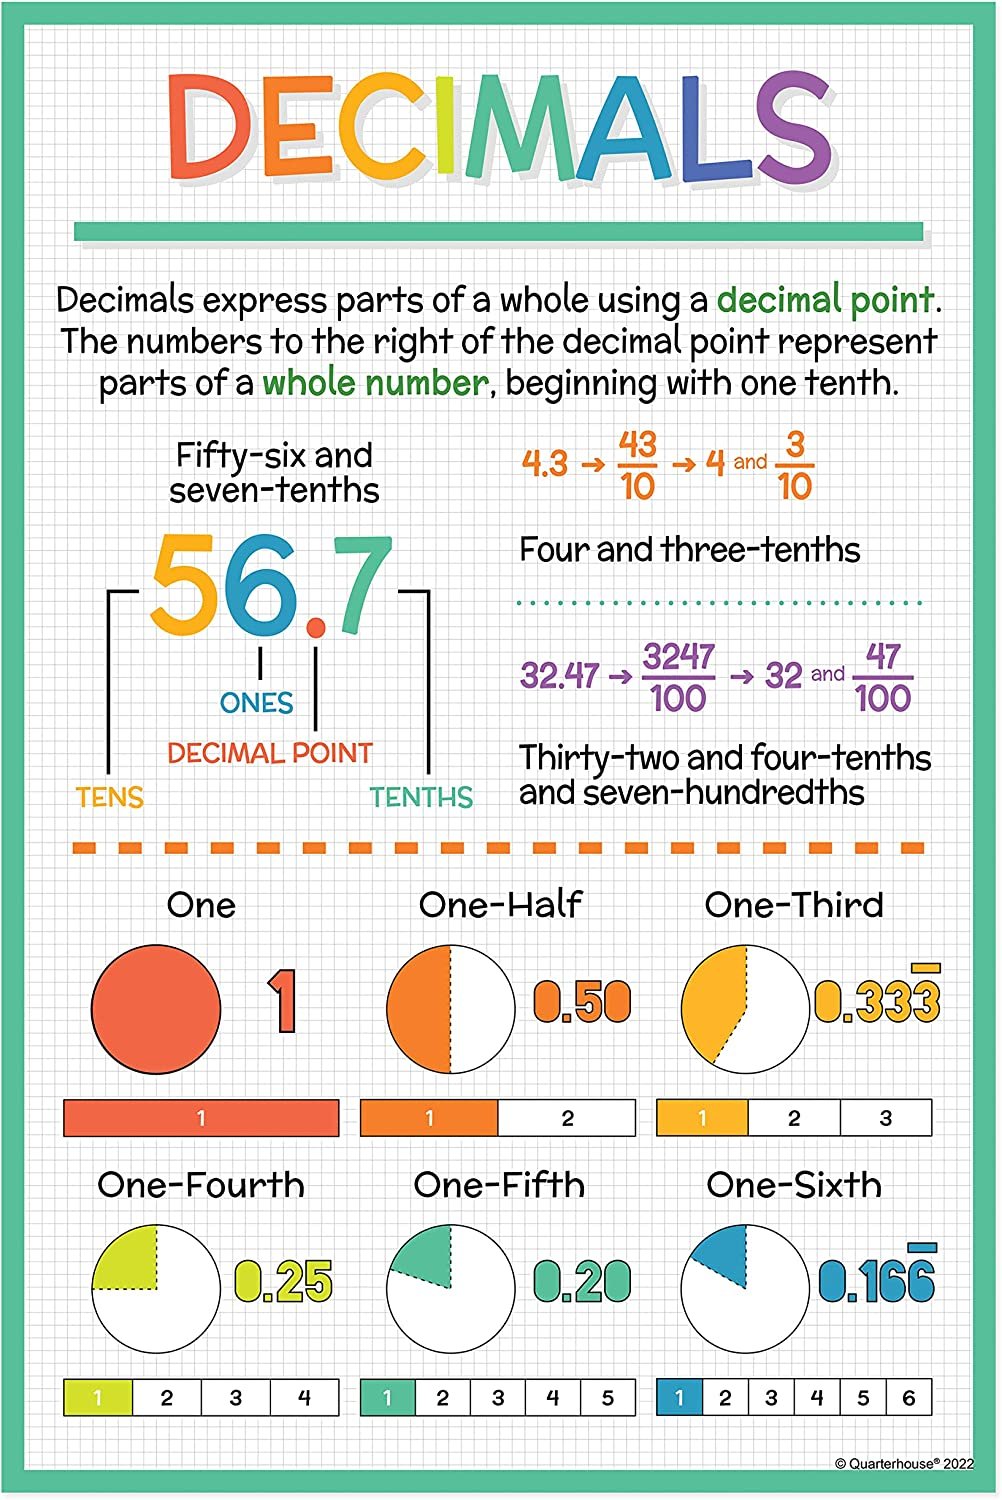 Quarterhouse Fractions, Decimals, and Percentages Poster Set, Math Classroom Learning Materials for K-12 Students and Teachers, Set of 4, 12 x 18 Inches, Extra Durable